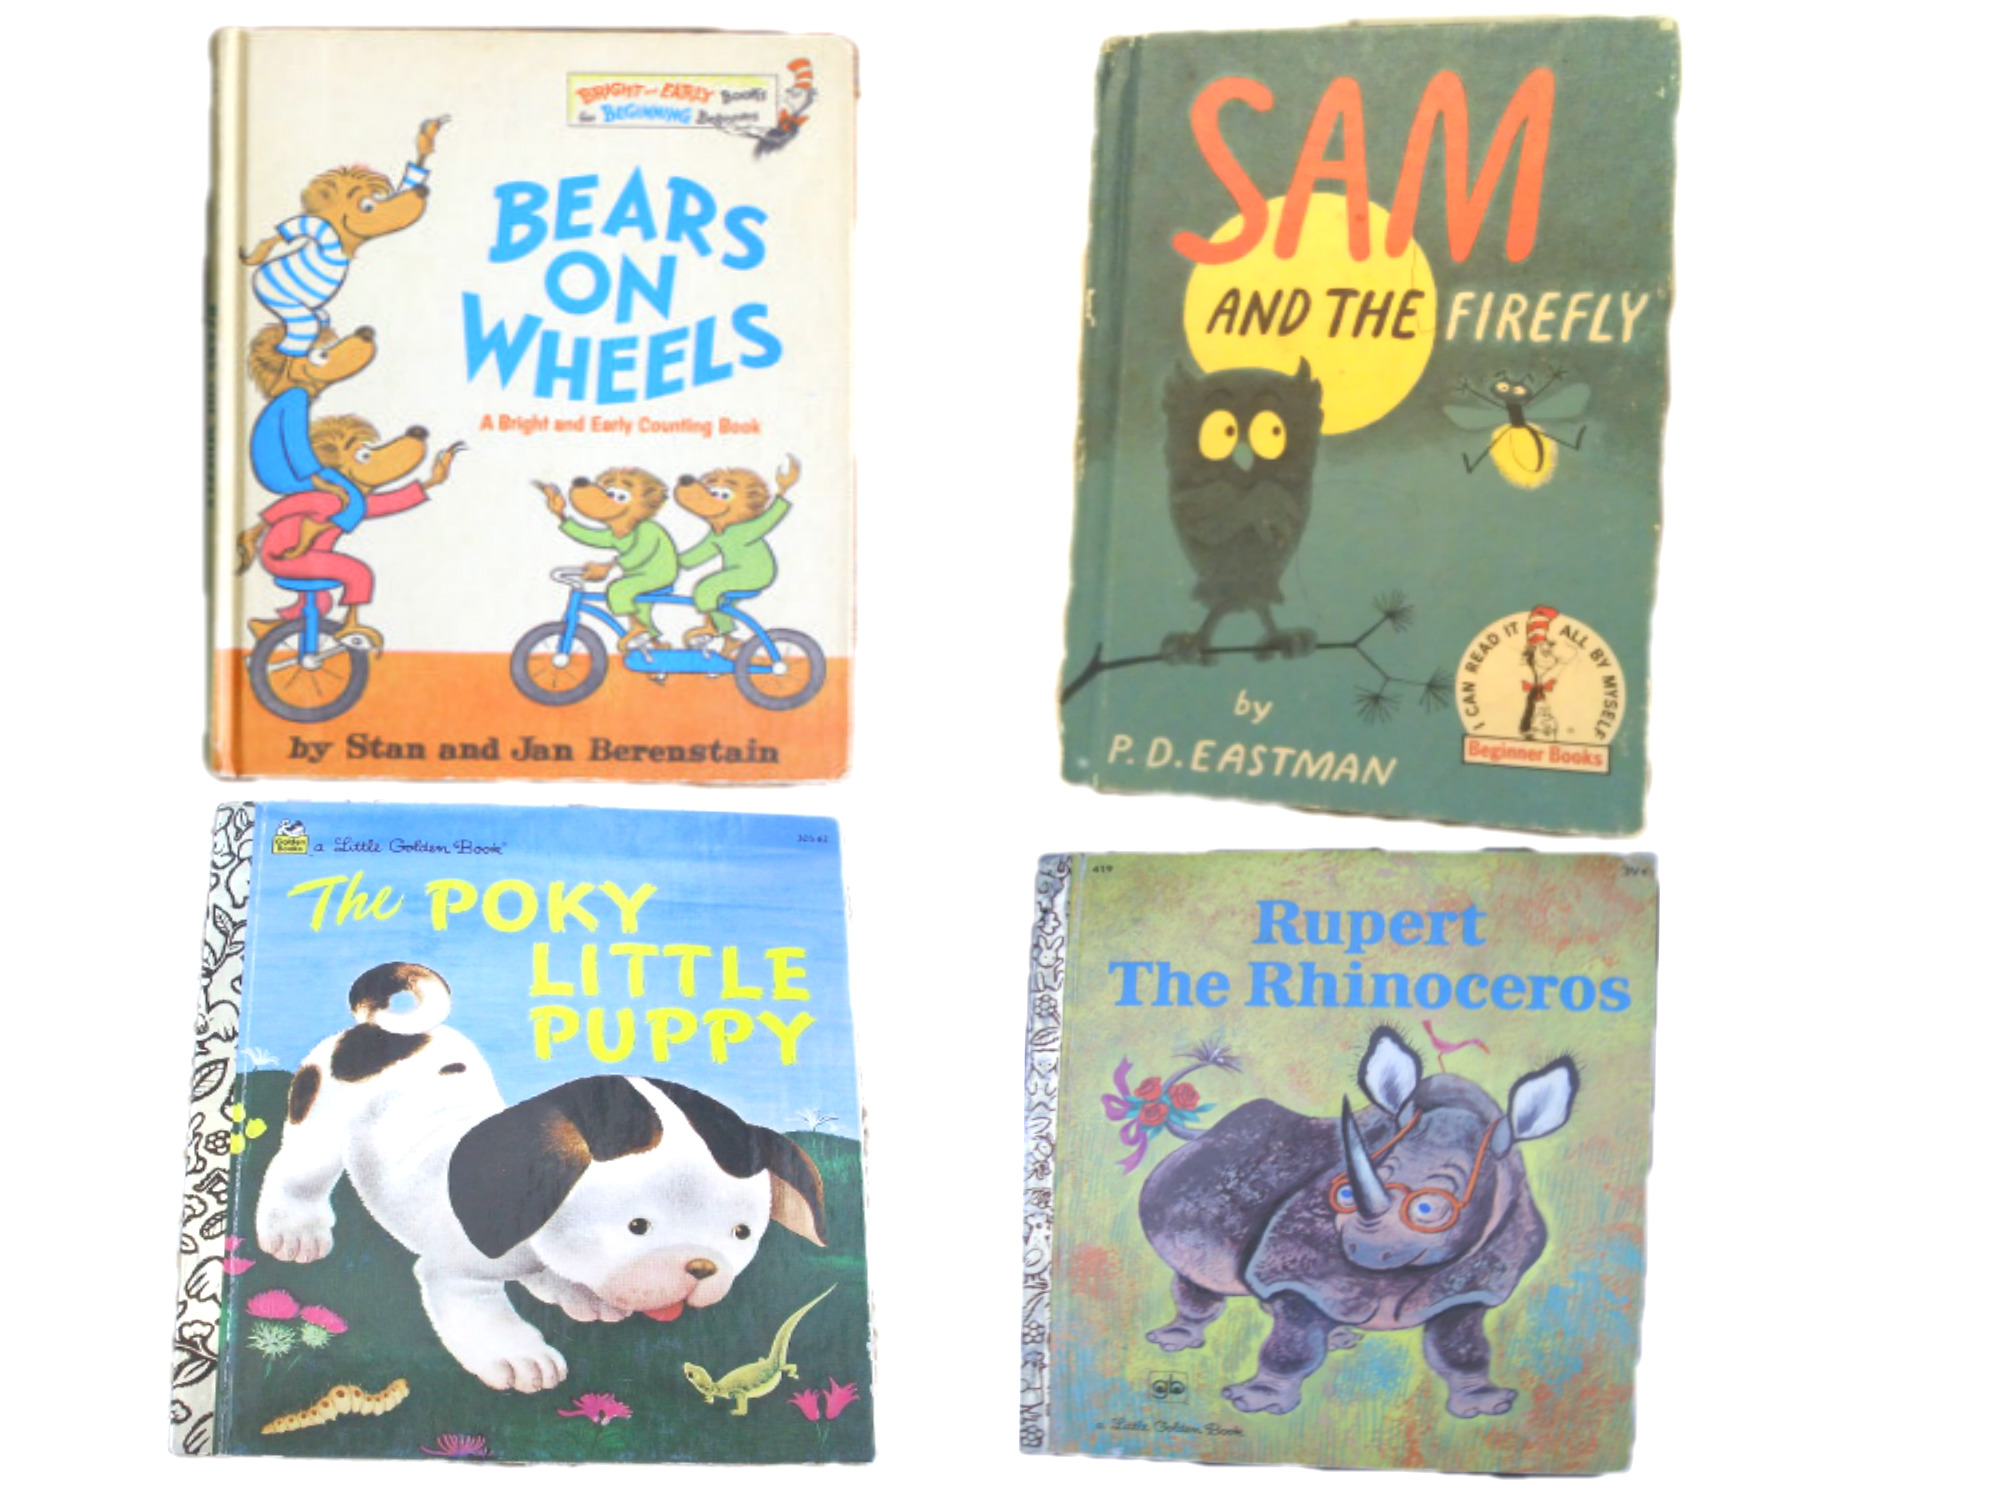 4 children's book sets - purchased free (Bears on Wheels, Sam and the Firefly and 2 ...2000 x 1500